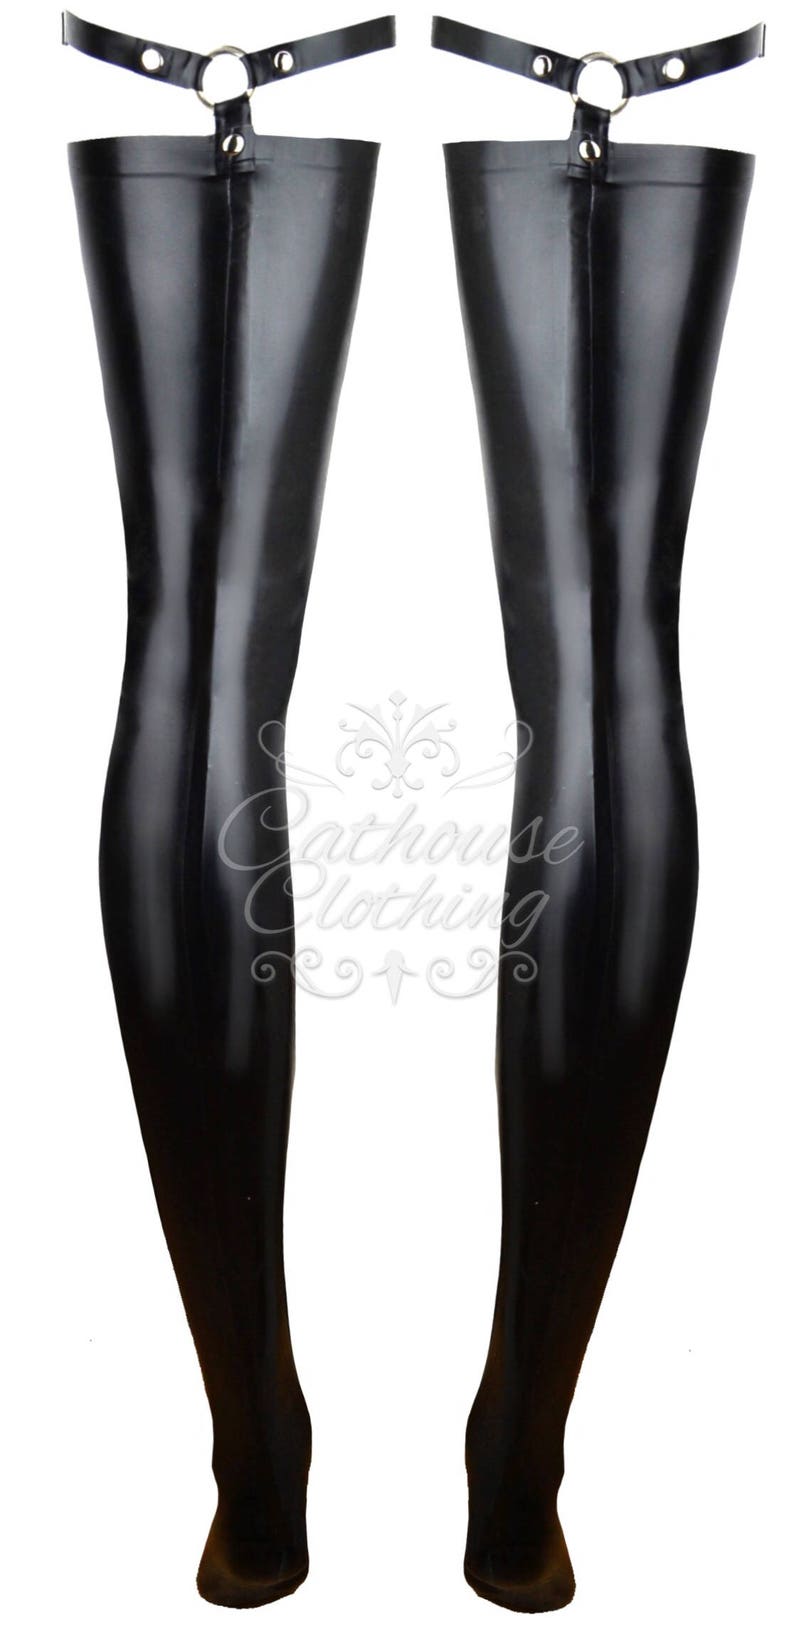 Latex rubber ring strap stockings by cathouse clothing | Etsy